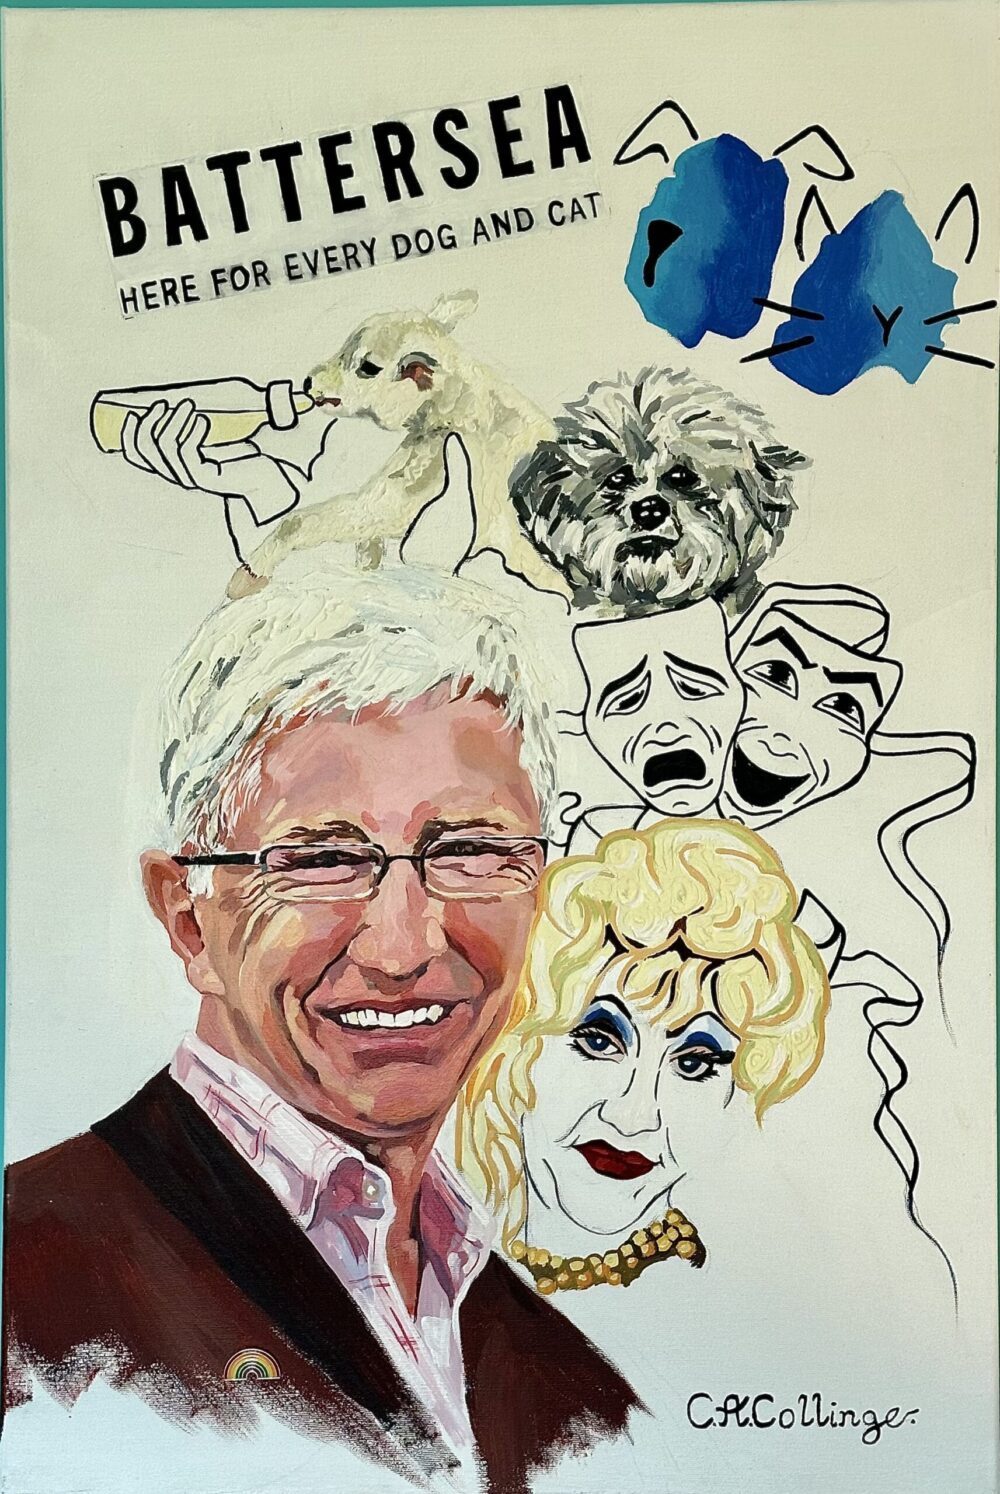 Collette Collinge's painting of Paul O'Grady